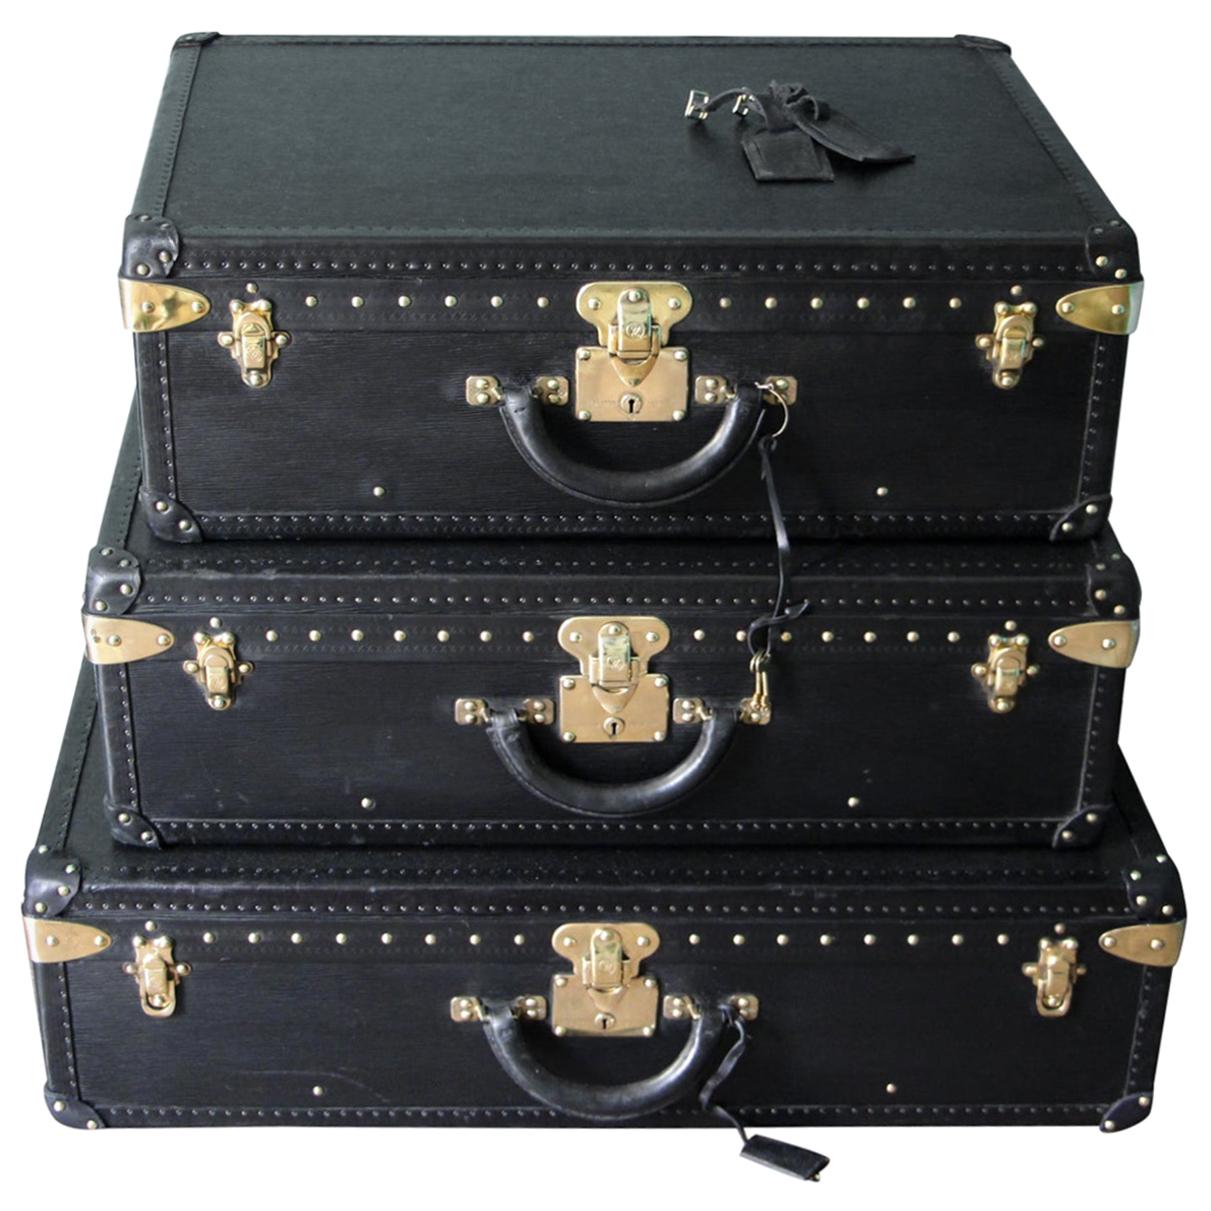 Stack of Black Louis Vuitton Alzer Suitcases, Louis Vuitton Trunks Louis Vuitton